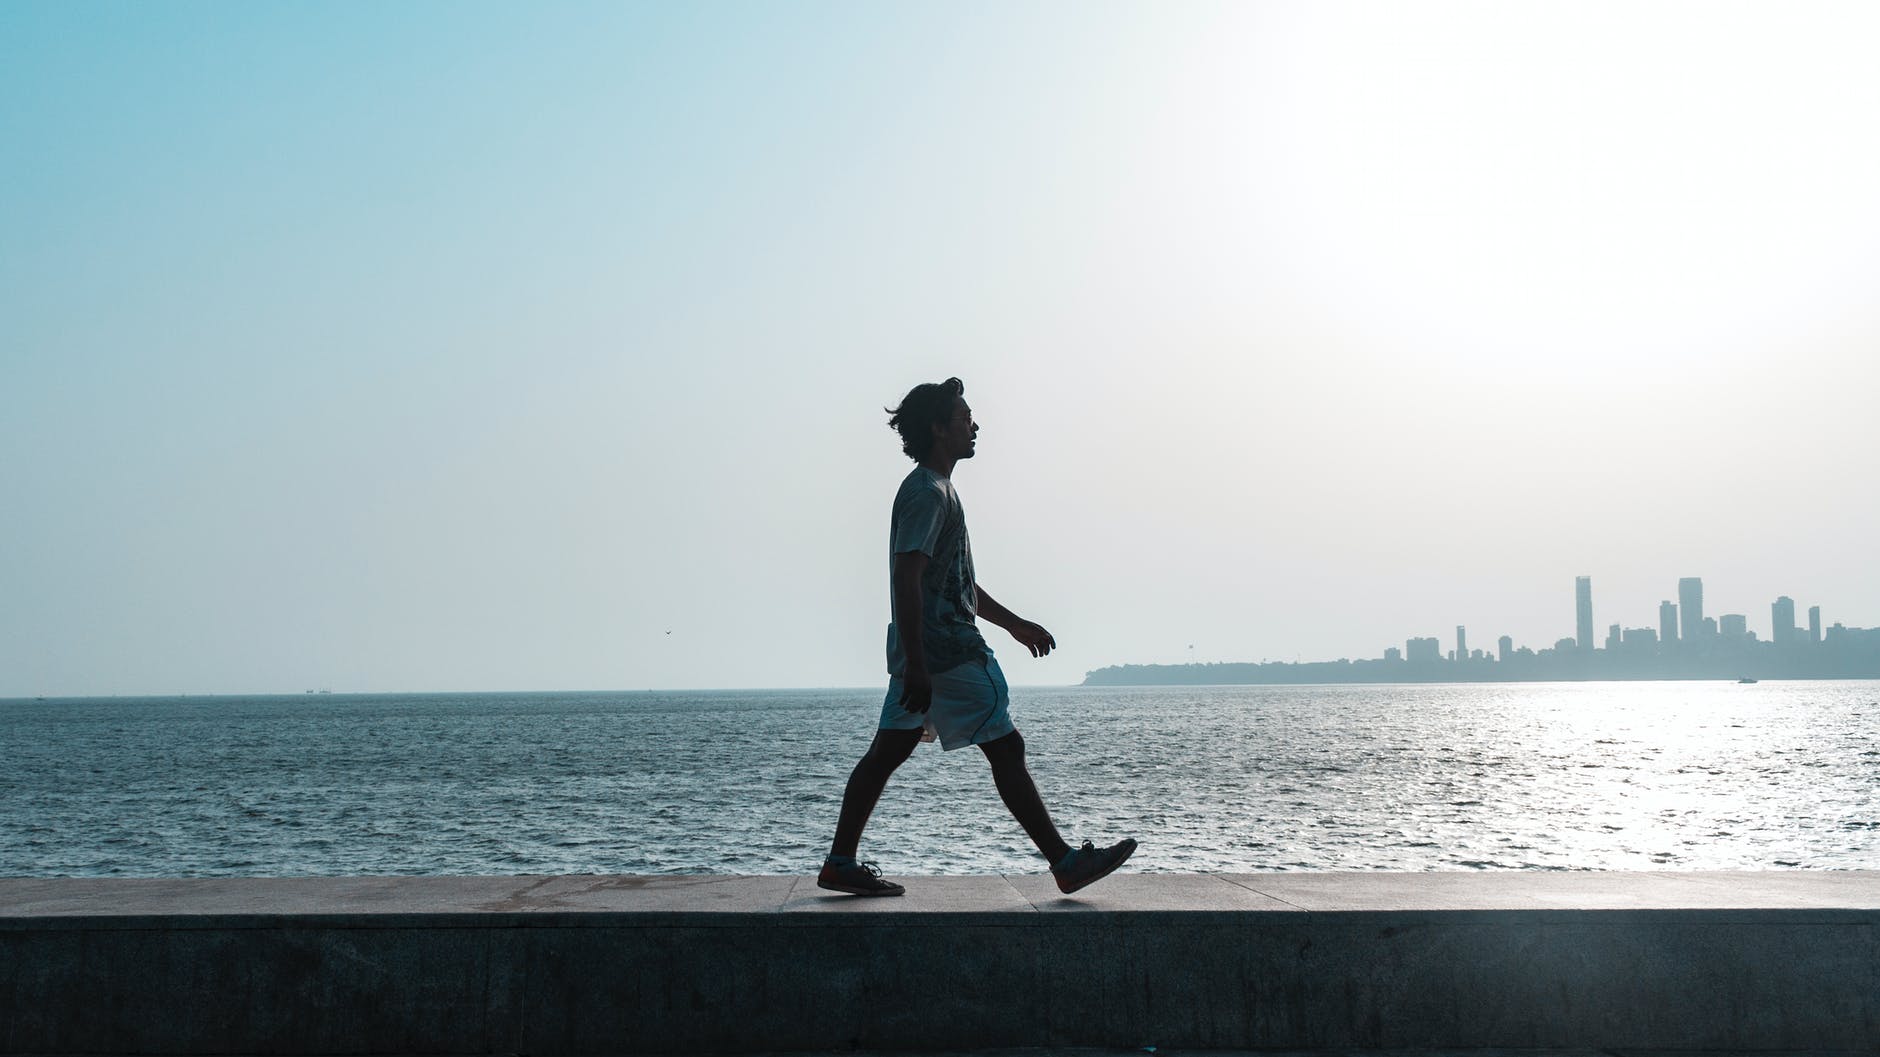 man walking near body of water
healthy while travelling